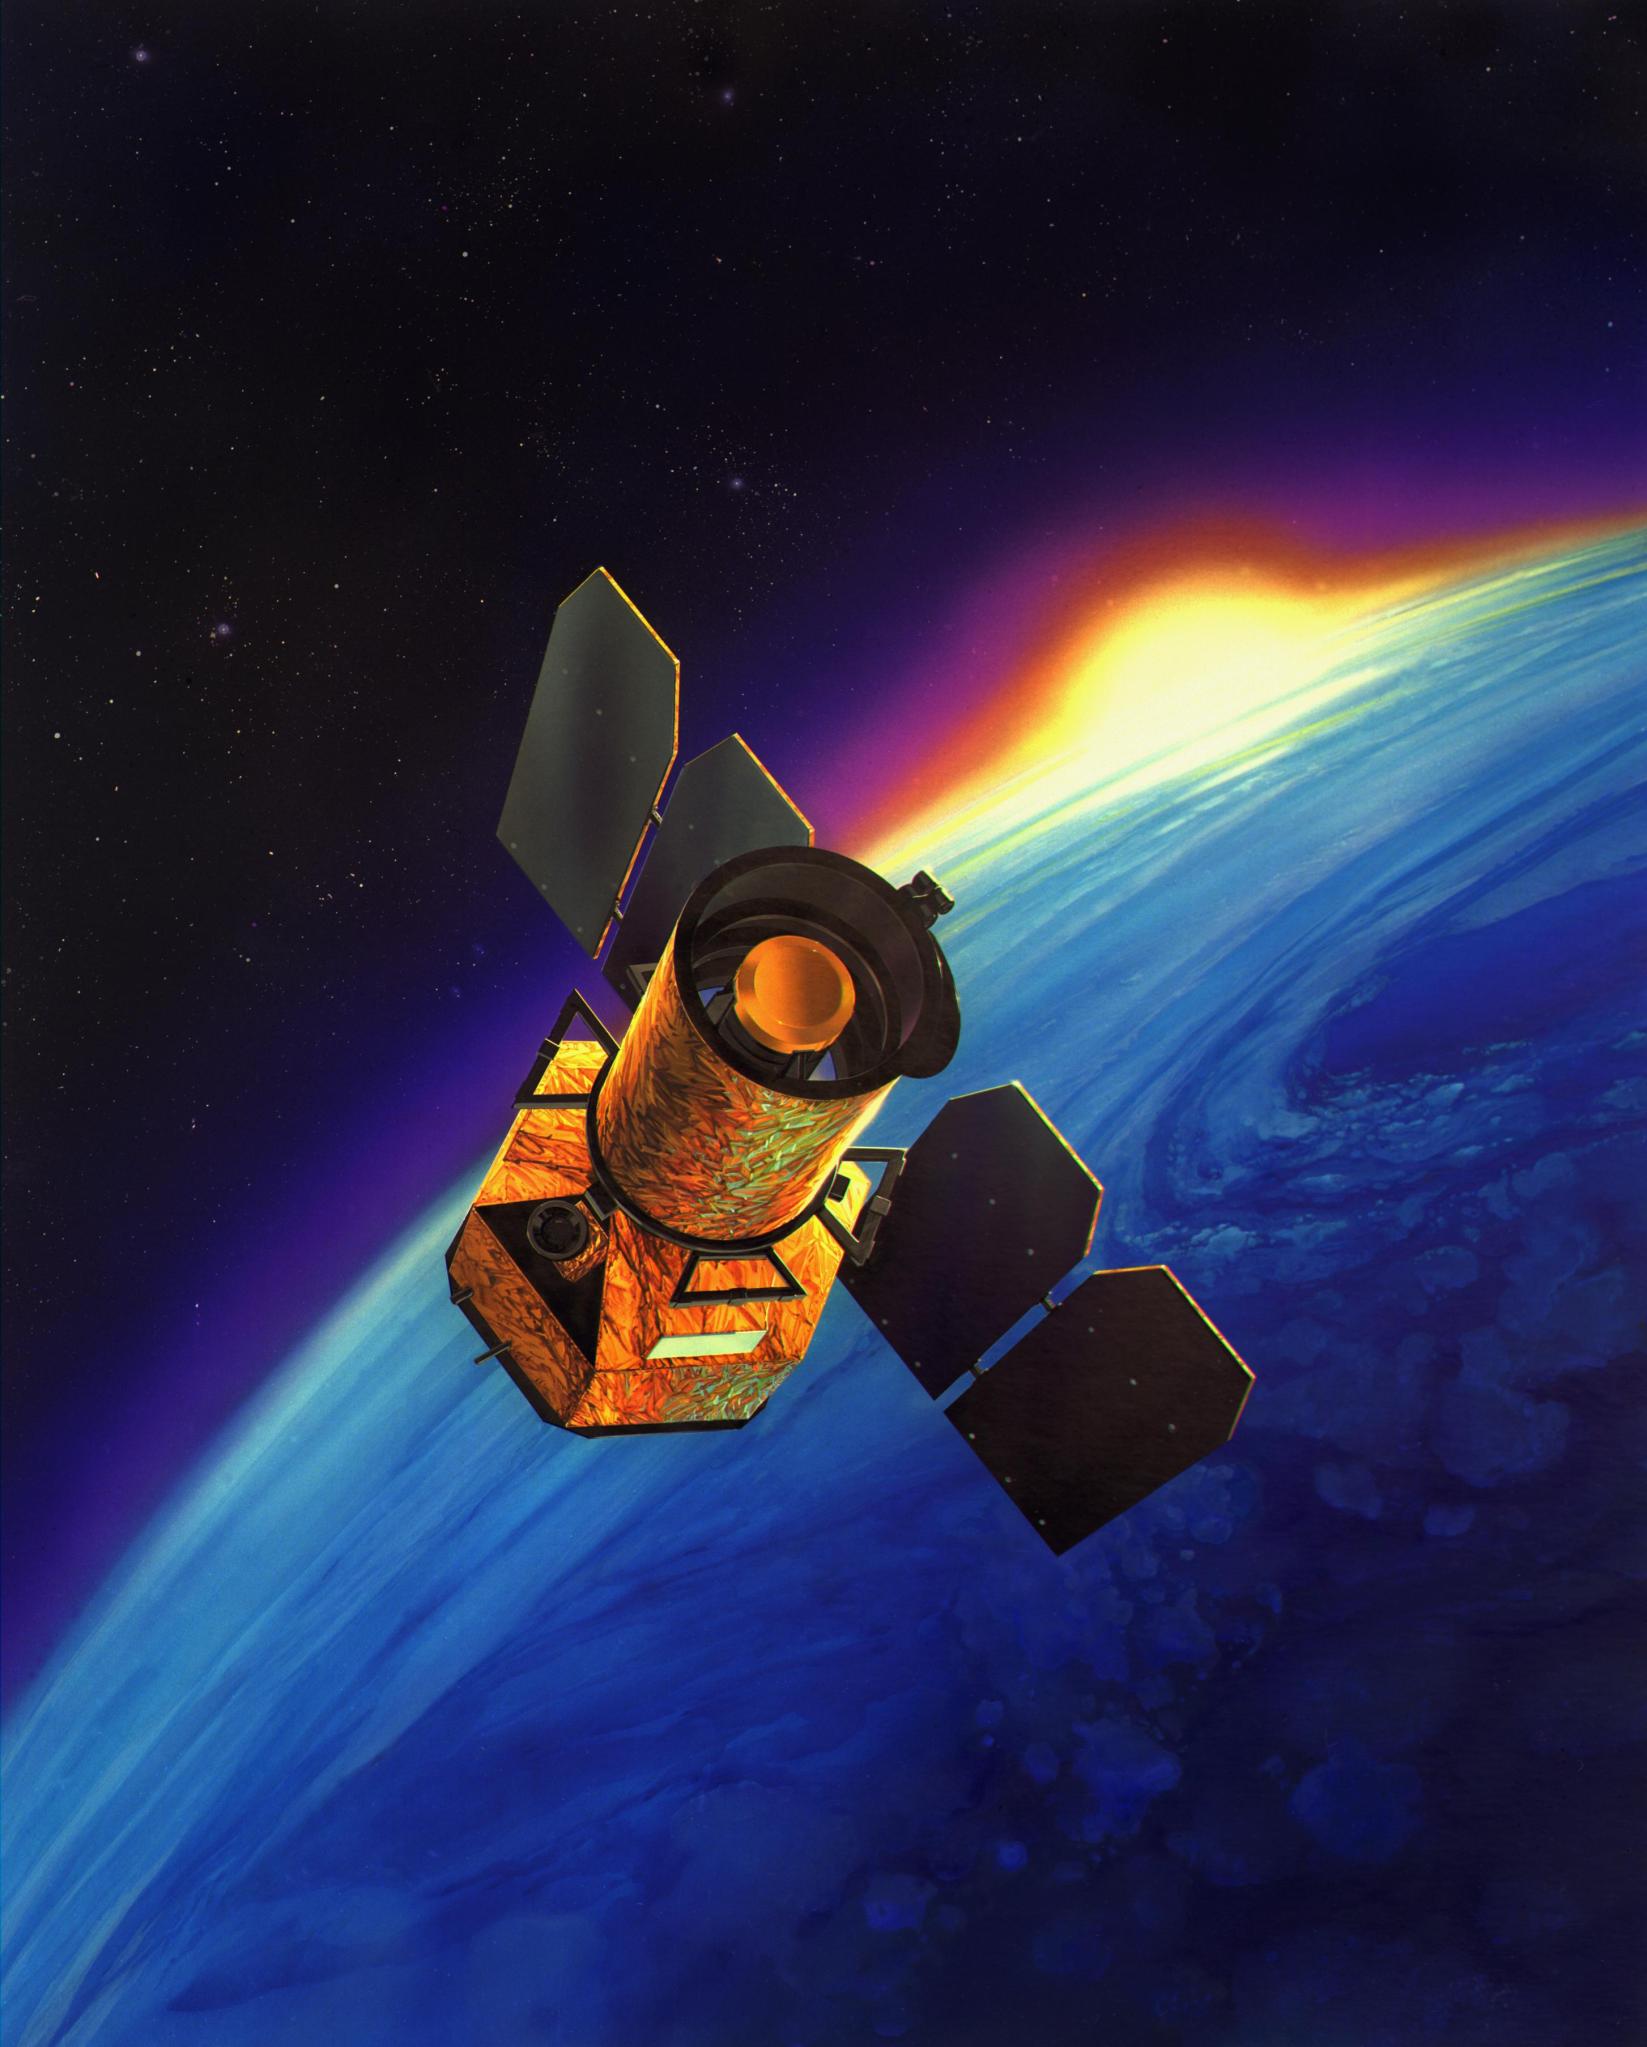 An illustration of the space telescope Galaxy Evolution Explorer. The telescope is in the foreground. Its main body is wrapped in gold foil and solar panels are attached on either side.